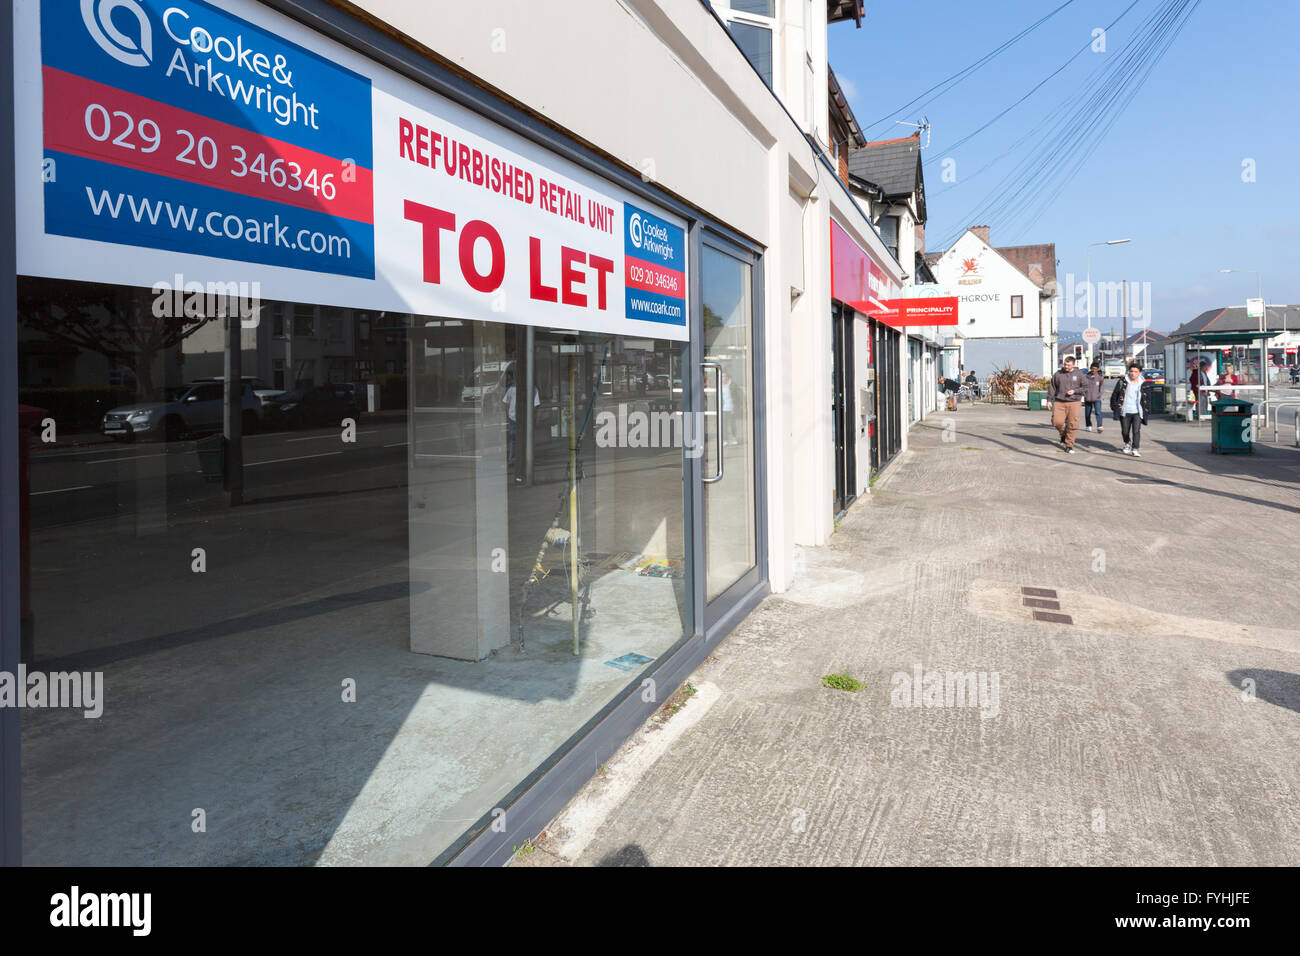 Estate agent sign in empty shop window to let for refurbished retail unit, Cardiff, Wales, UK Stock Photo